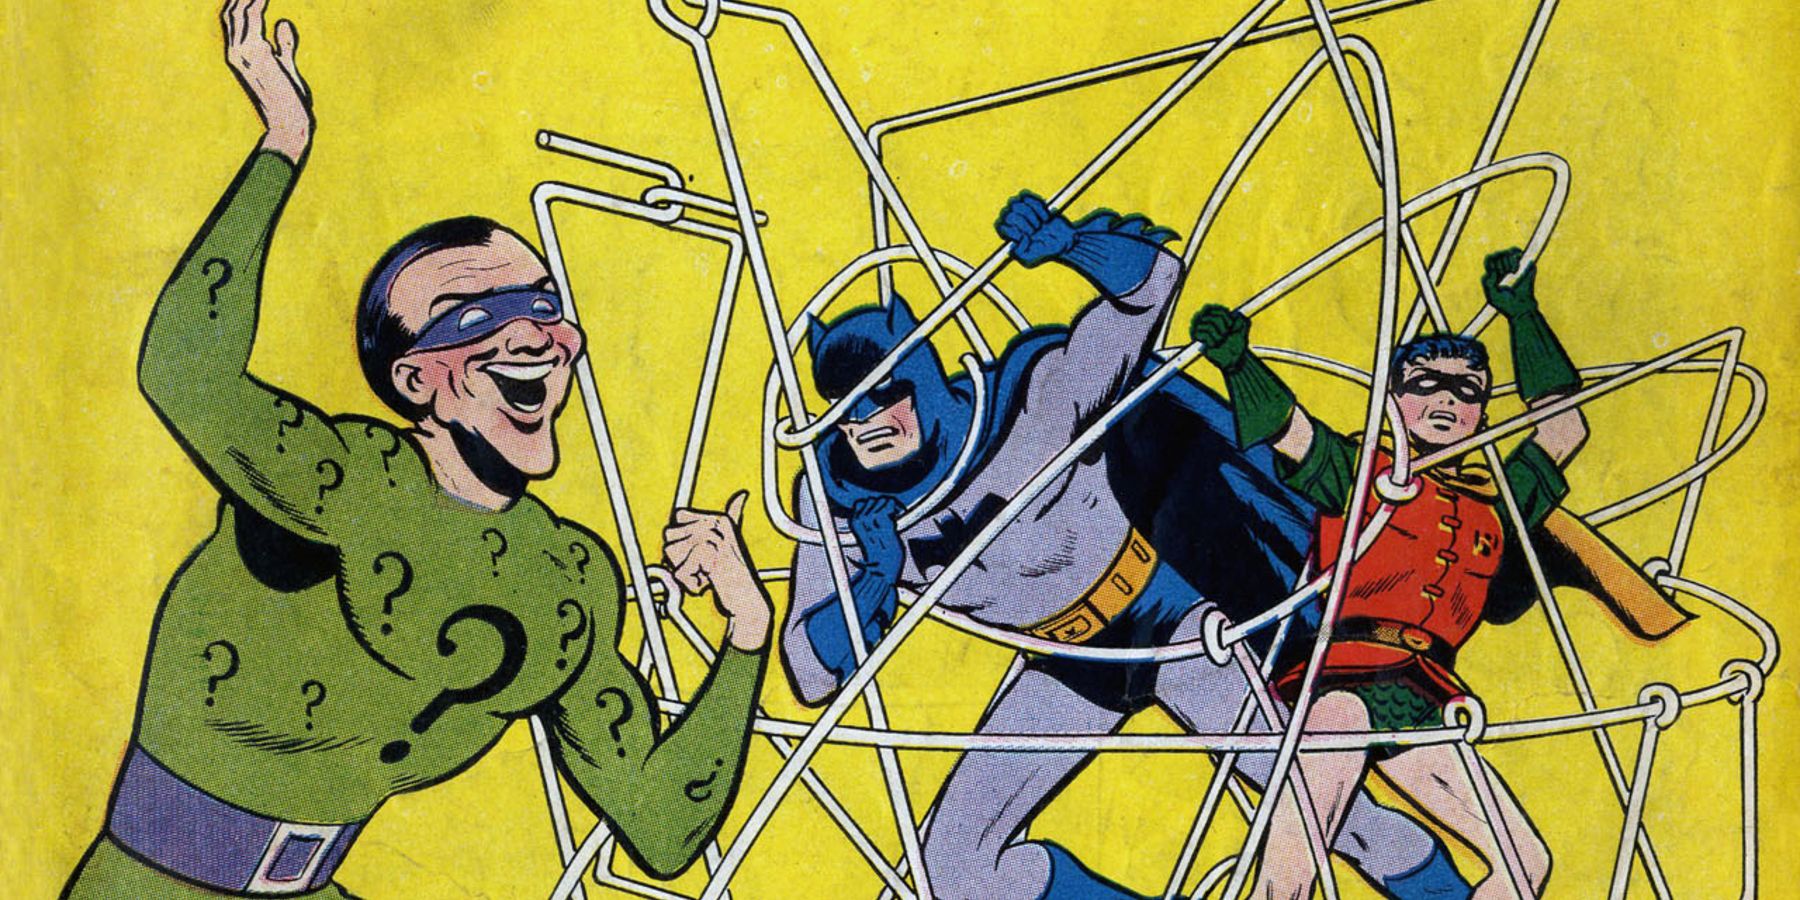 The Riddler capturing Batman and Robin in cover artwork for Detective Comics 140